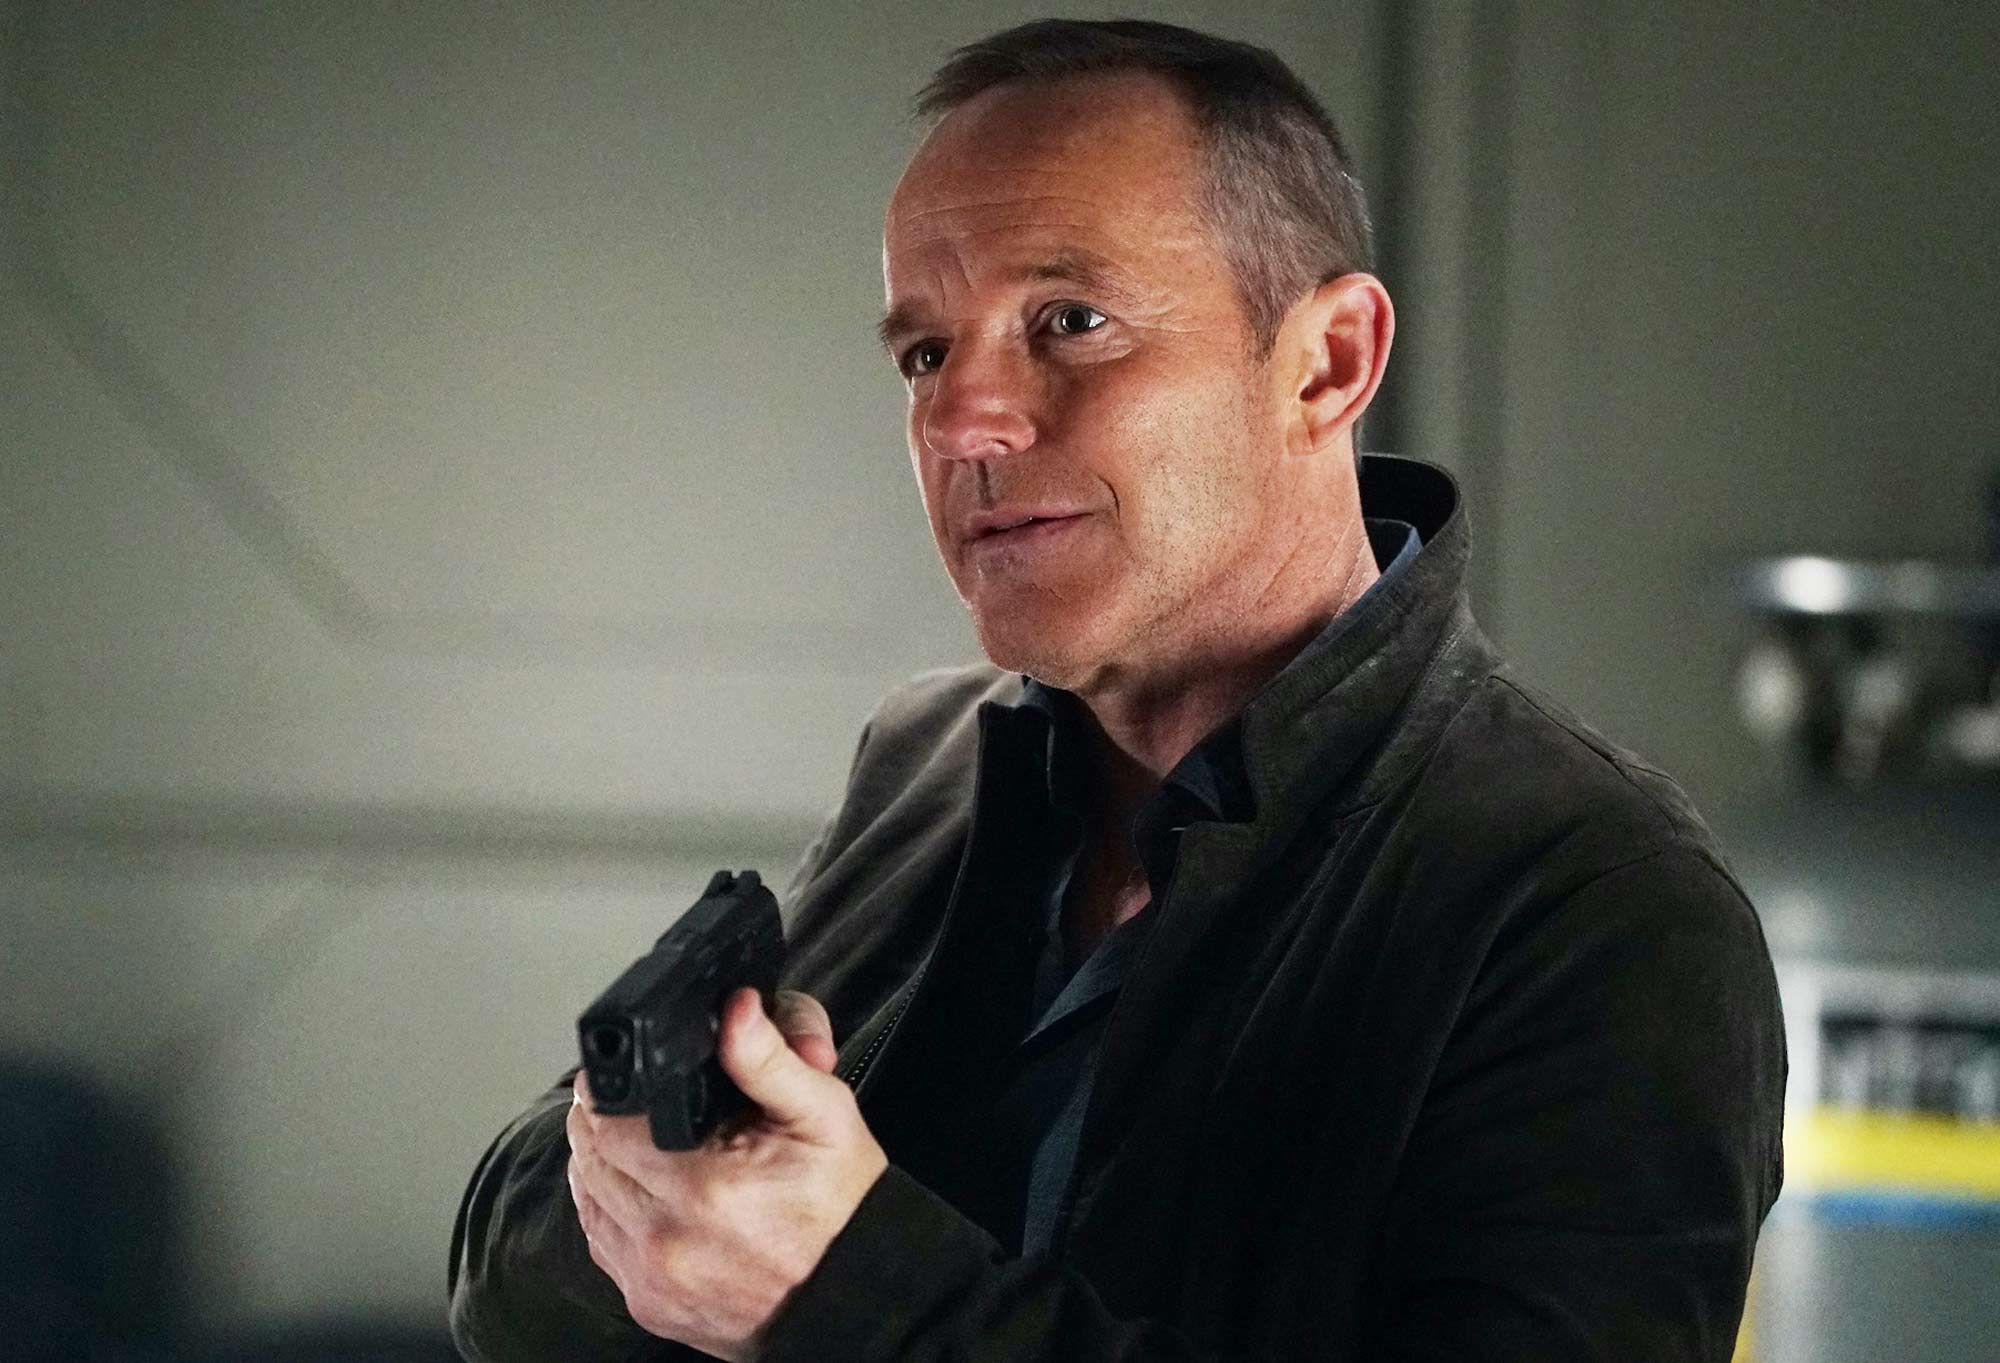 Agents of SHIELD killed off Coulson because everyone thought the show was  over